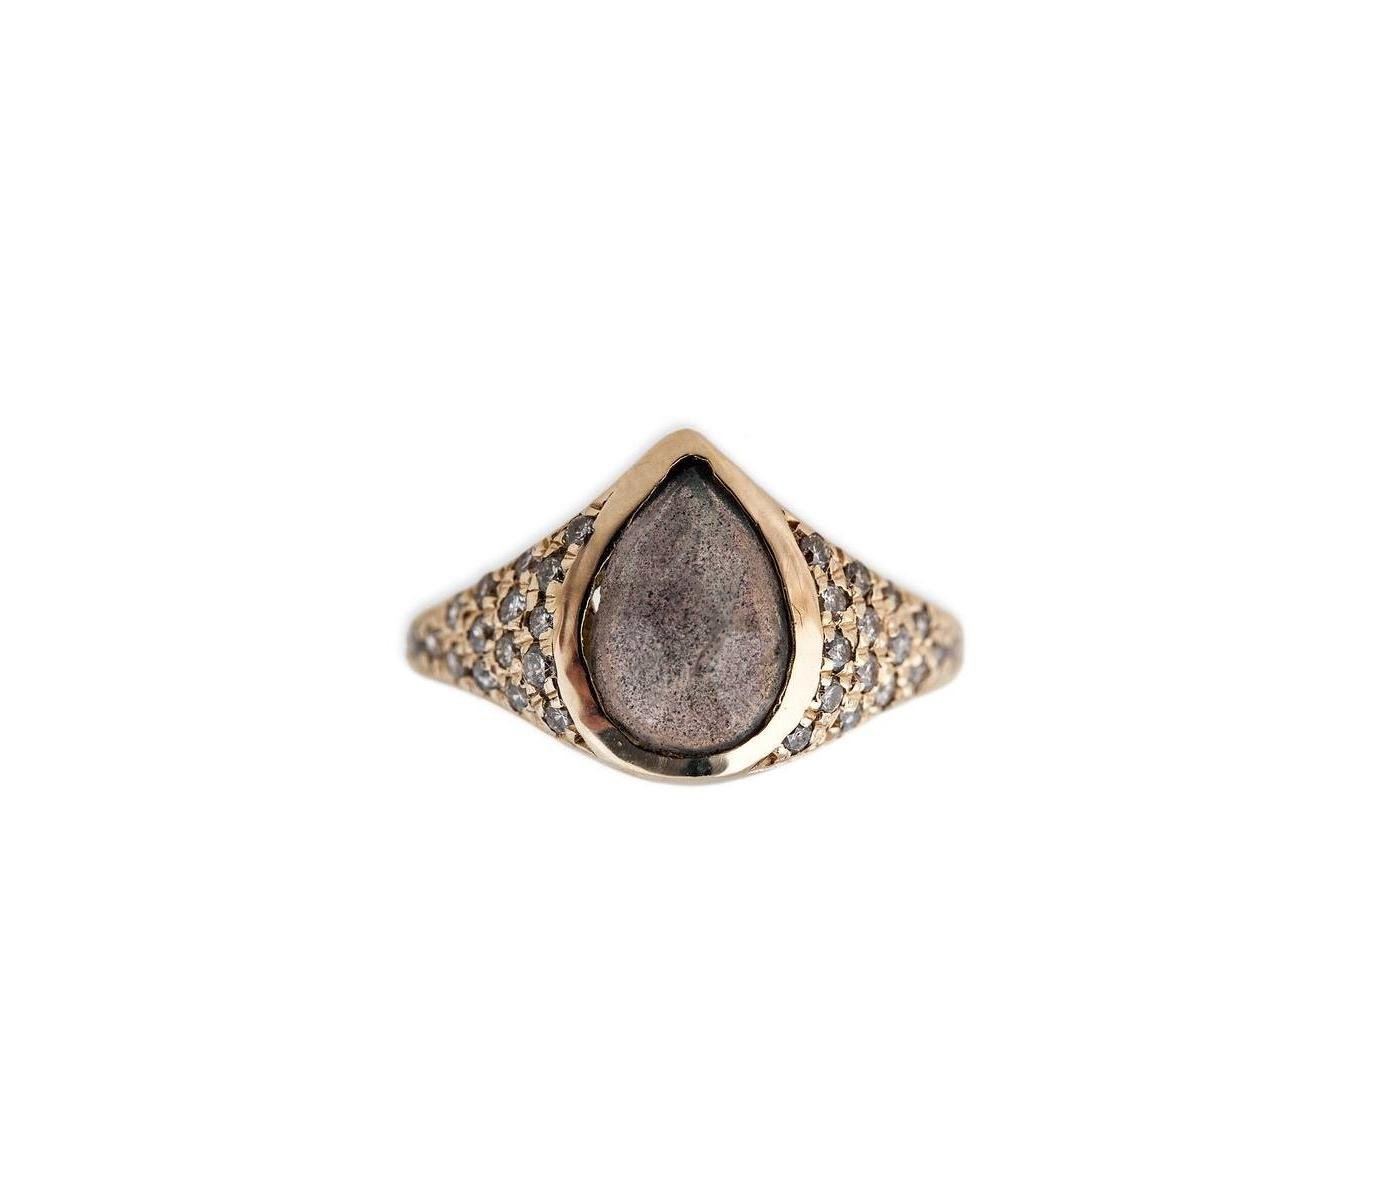 Ring by Jacquie Aiche